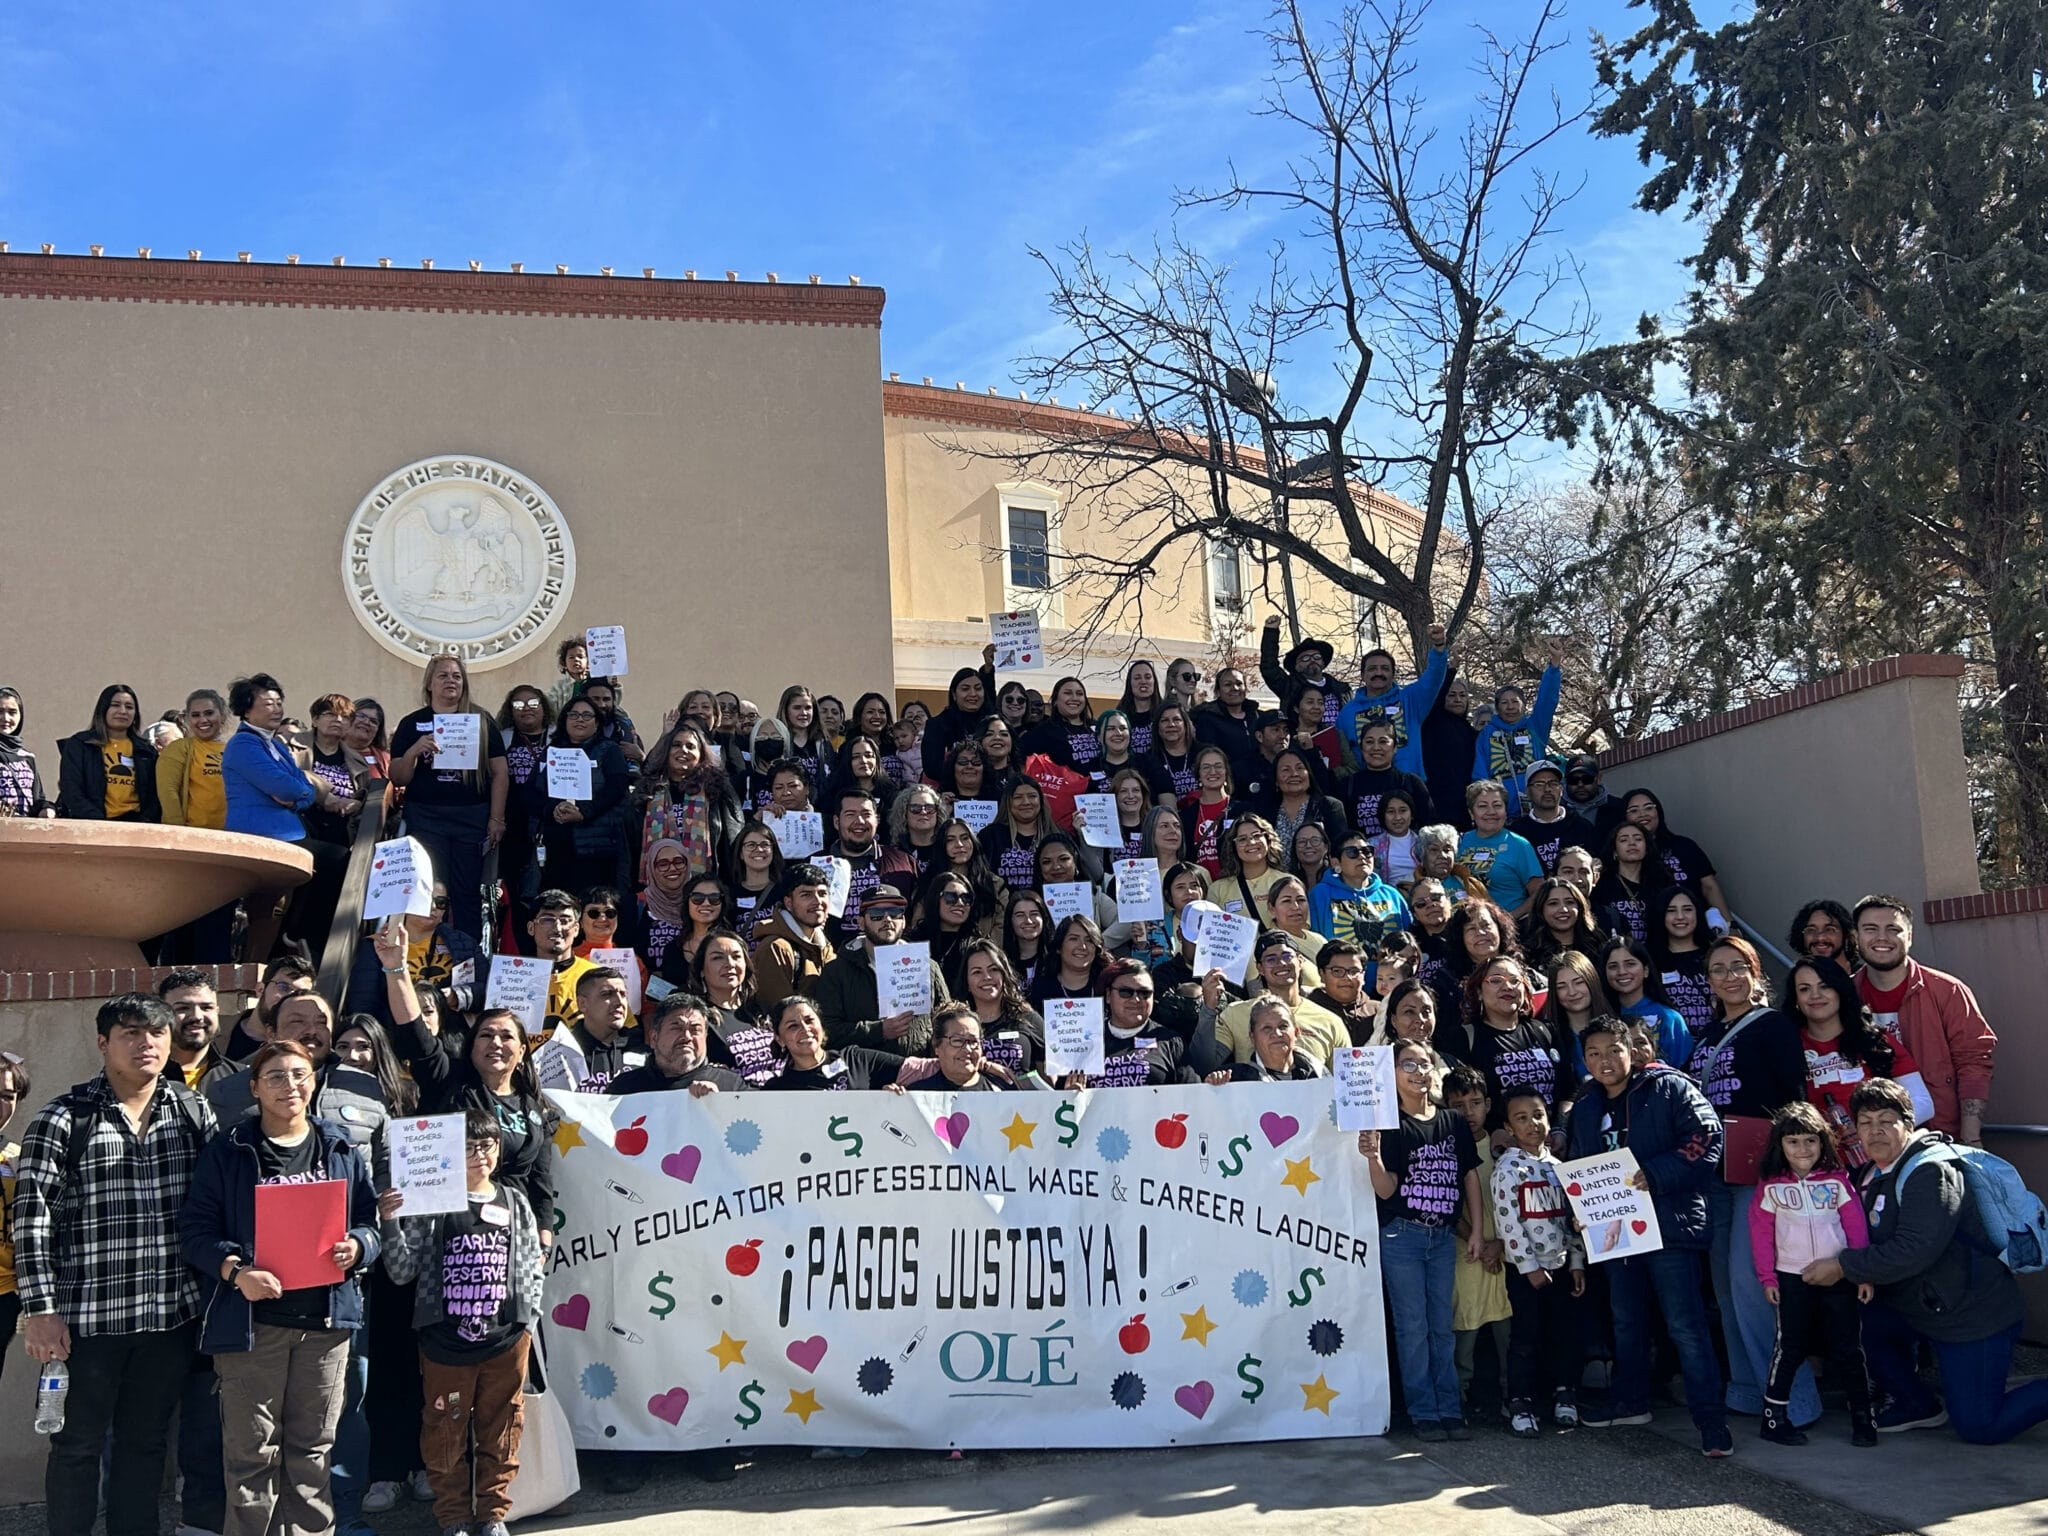 A large group of educators, children and community members gather on stairs behind a sign that reads “Early Educator Professional Wage and Career Ladder, Pagos Justos Ya!”